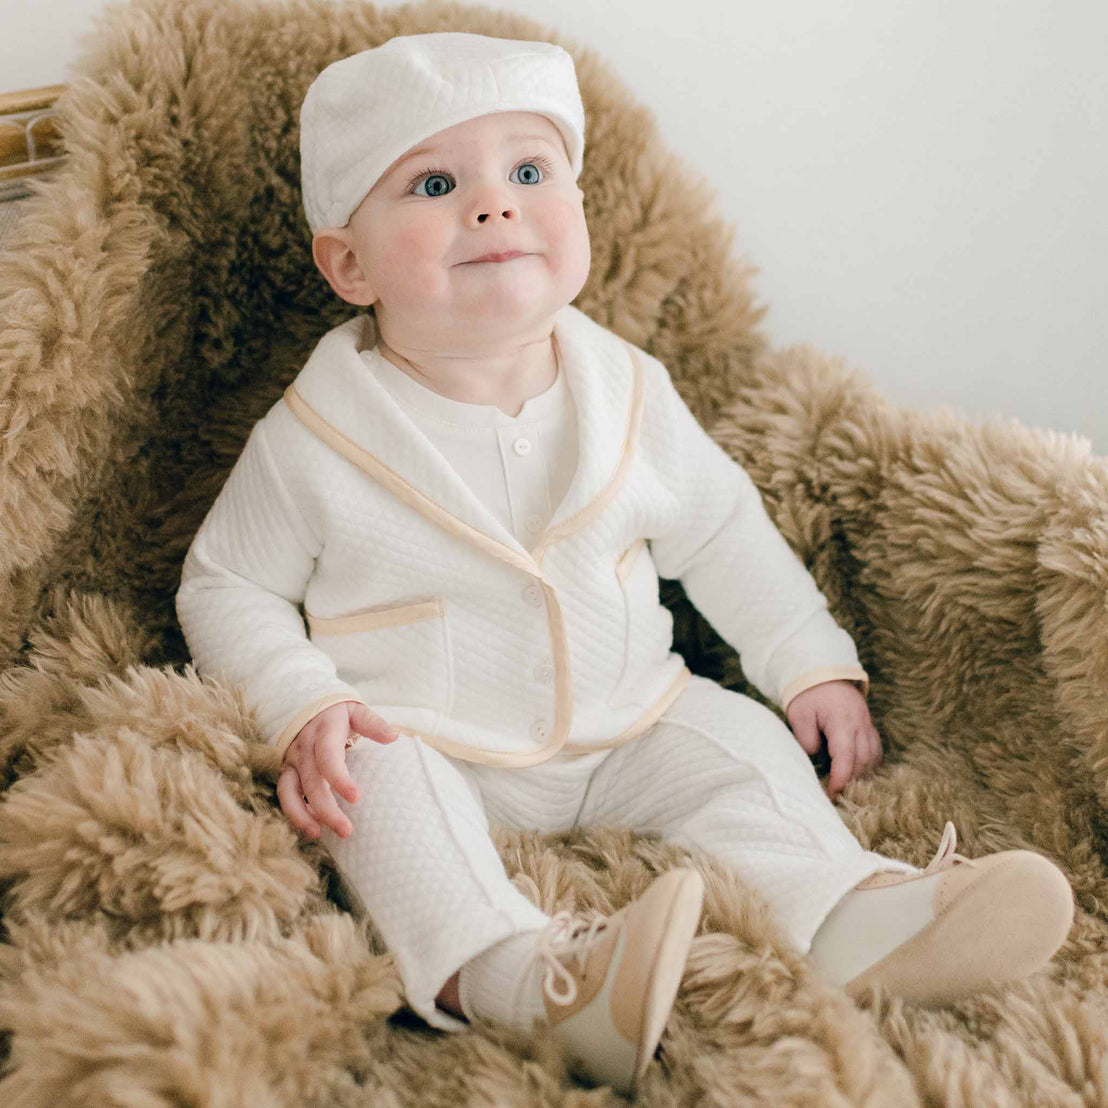 Baby sitting on a chair with brown fur. He is wearing the Liam 3-Piece Suit made with soft ivory quilted cotton and champagne silk trim. Underneath he is wearing a cotton onesie